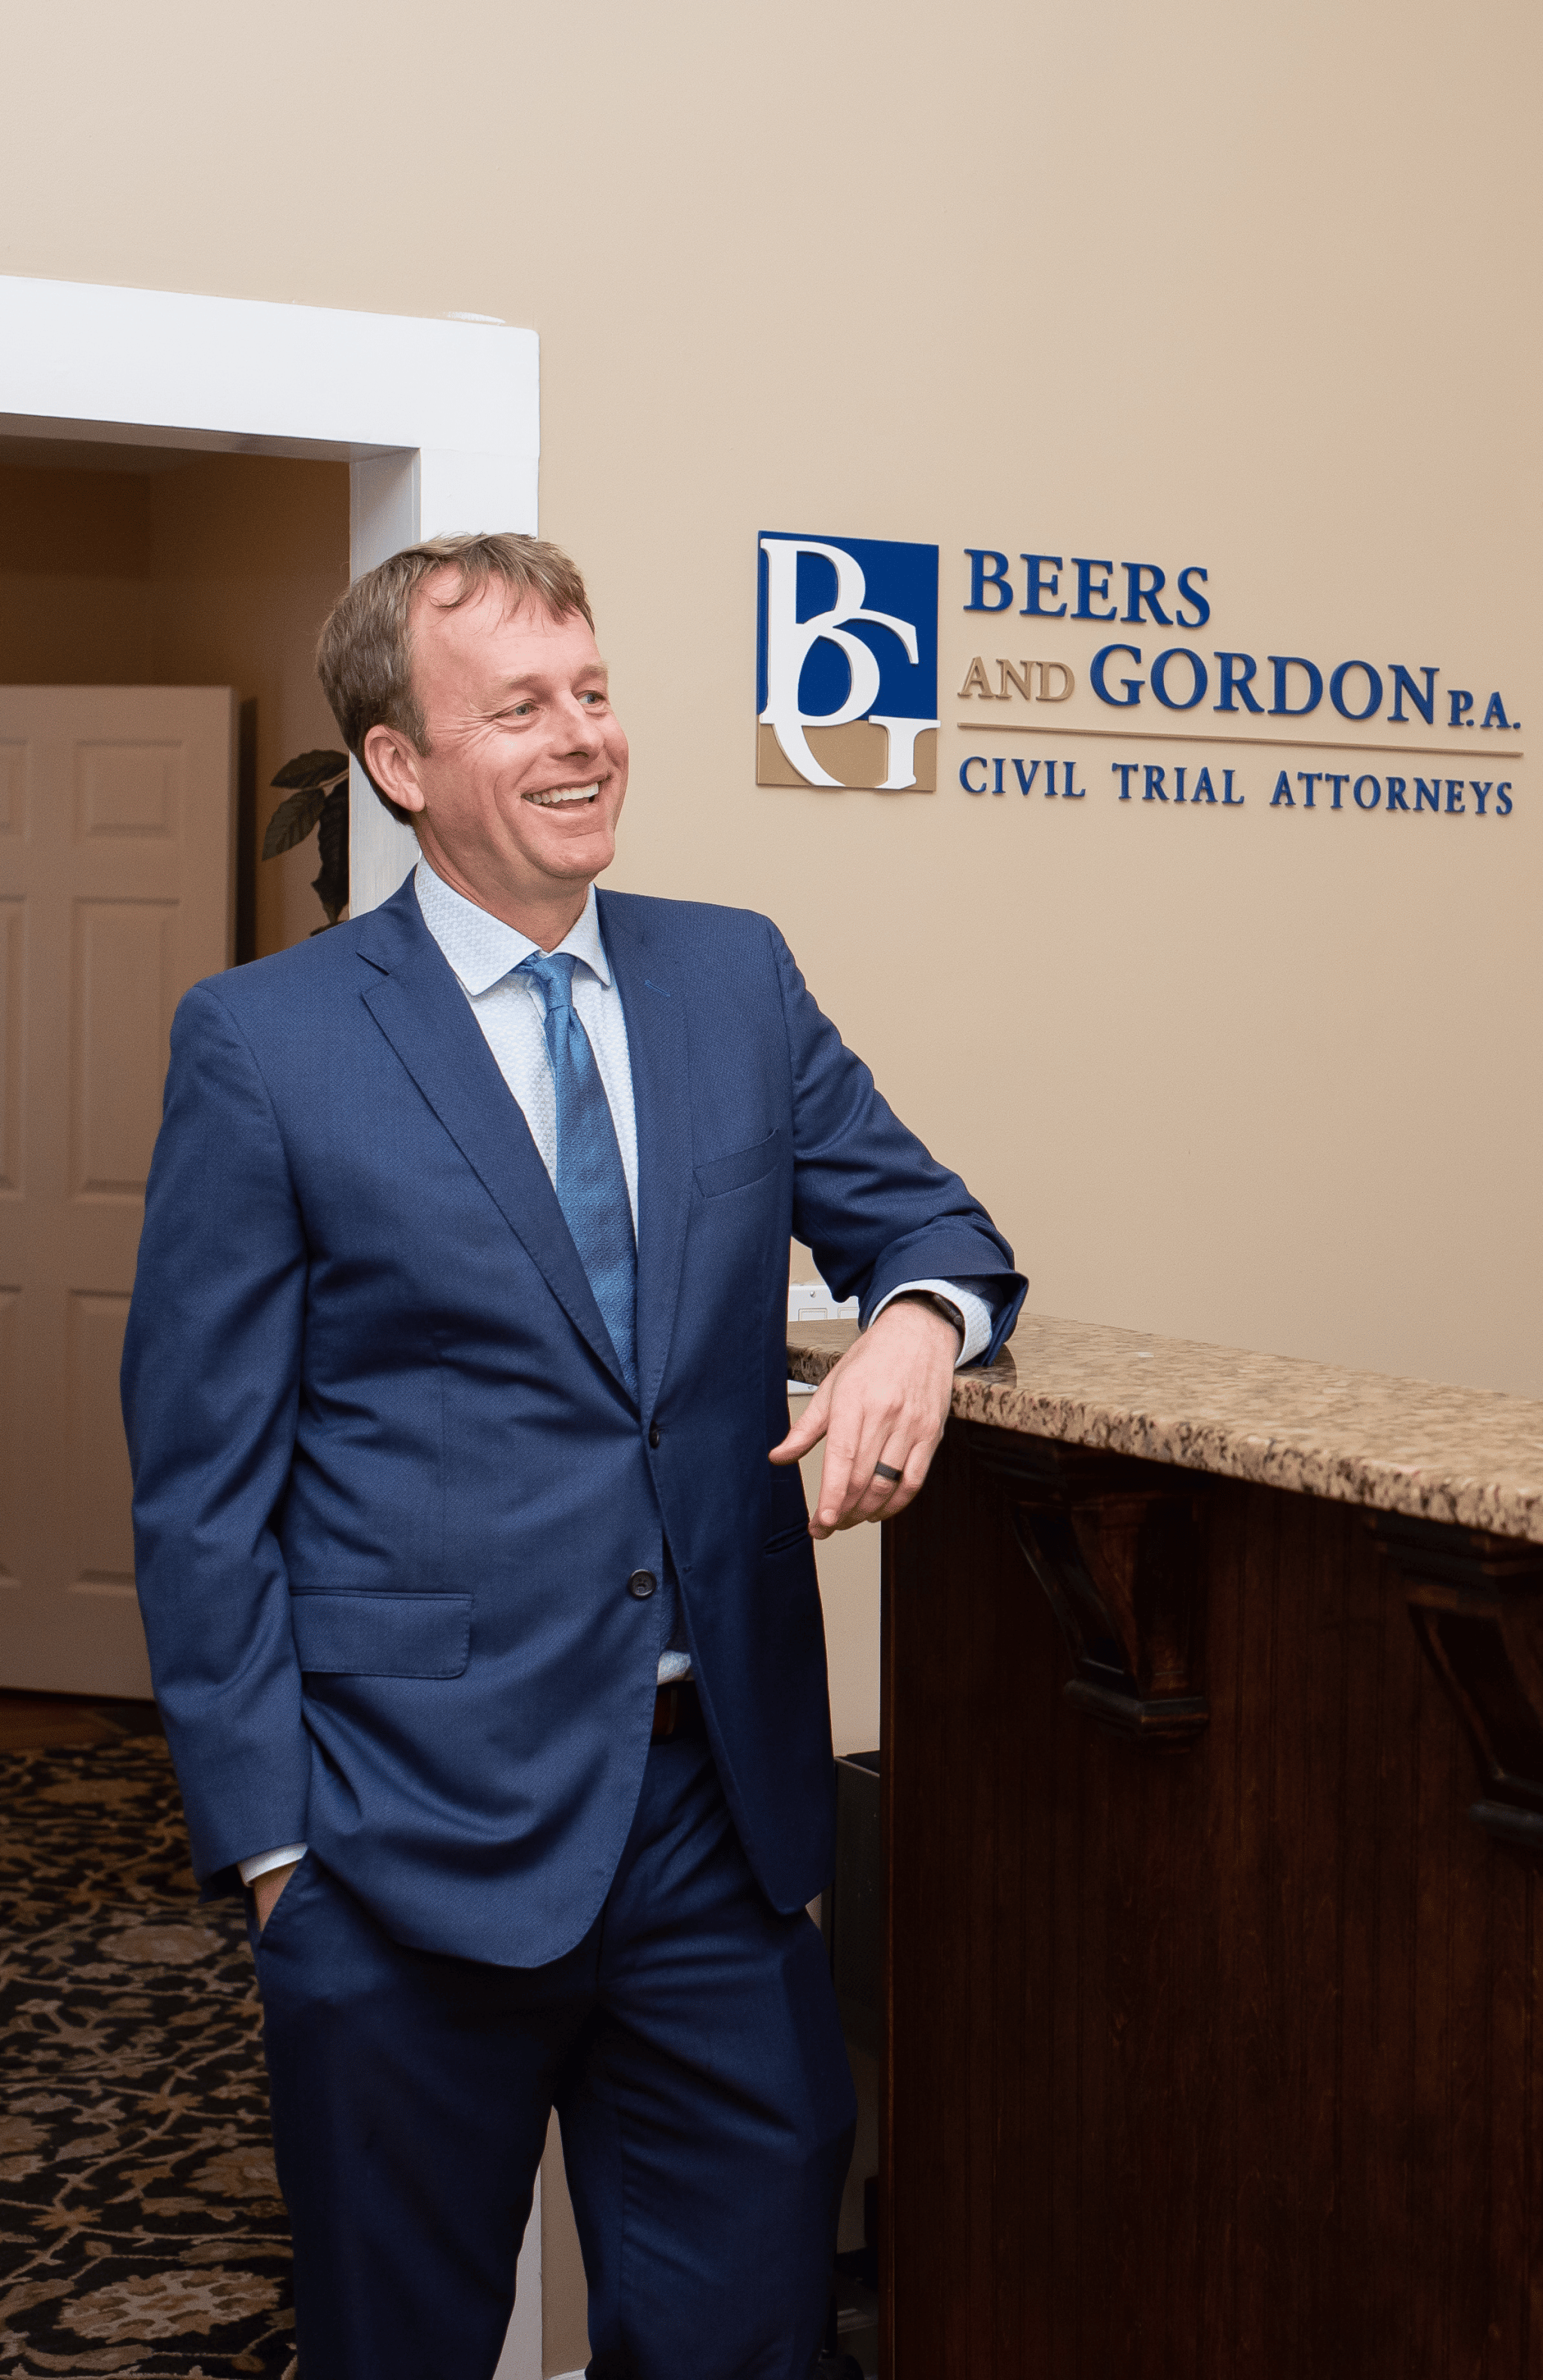 Personal injury attorney Jim Gordon smiling in the lobby of the Beers & Gordon offices.